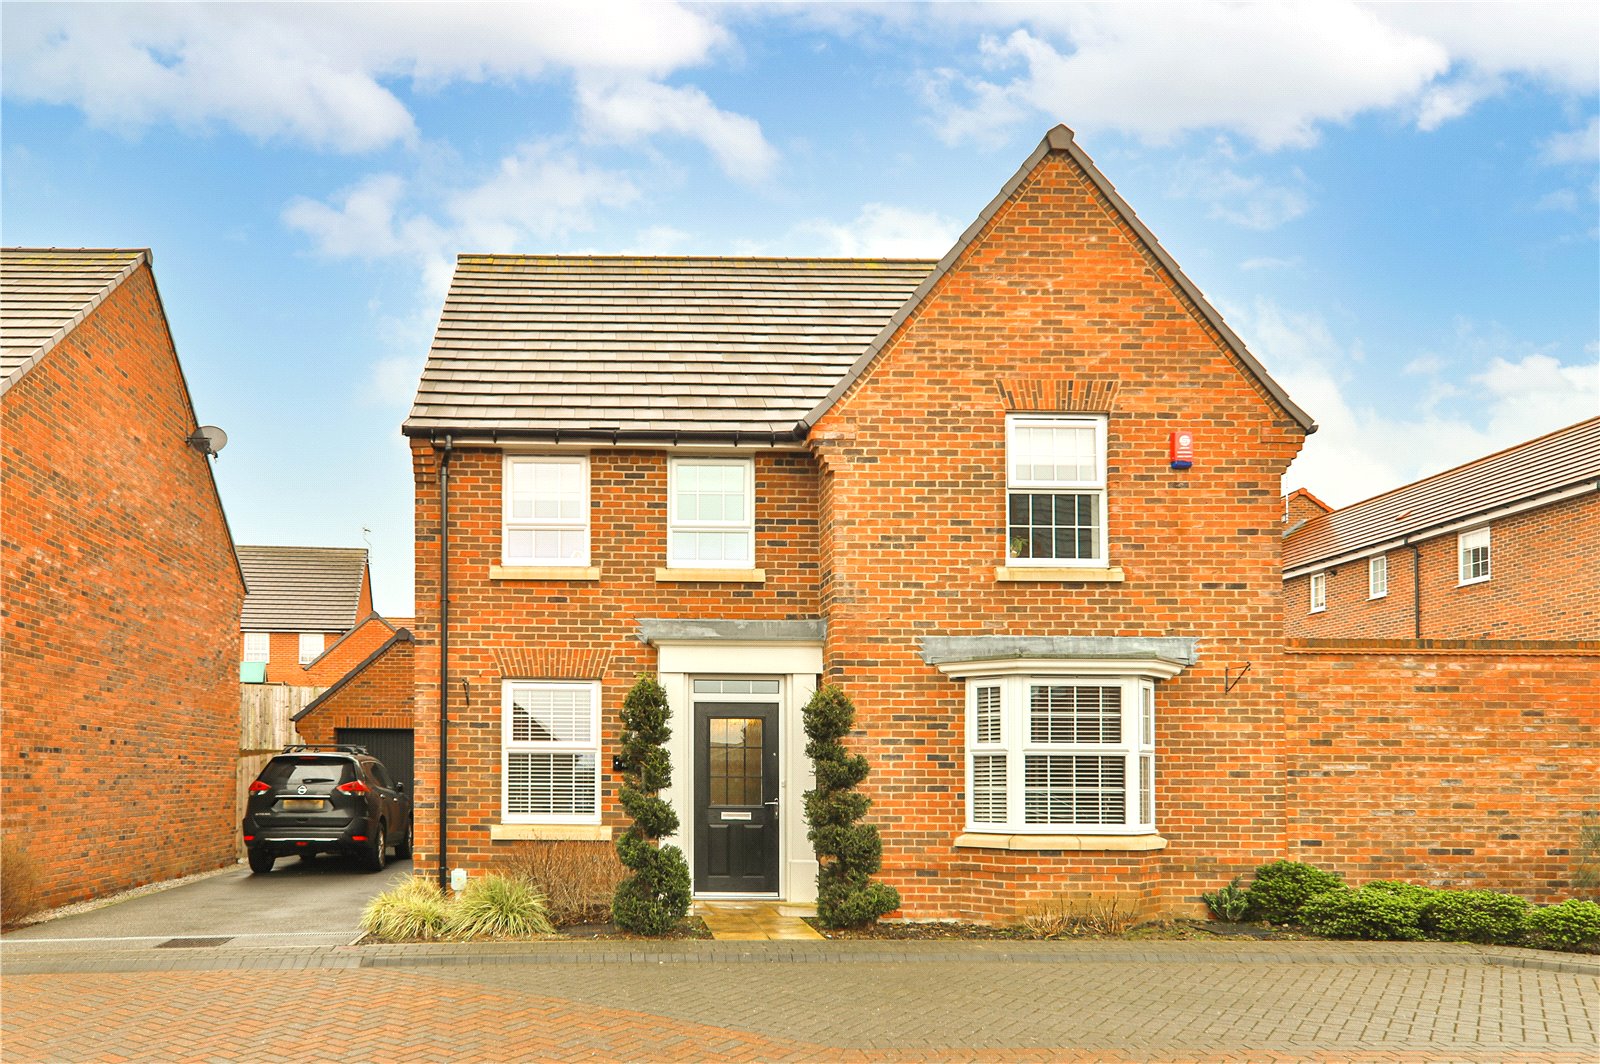 4 bed house for sale in Foxglove Way, Beverley 0